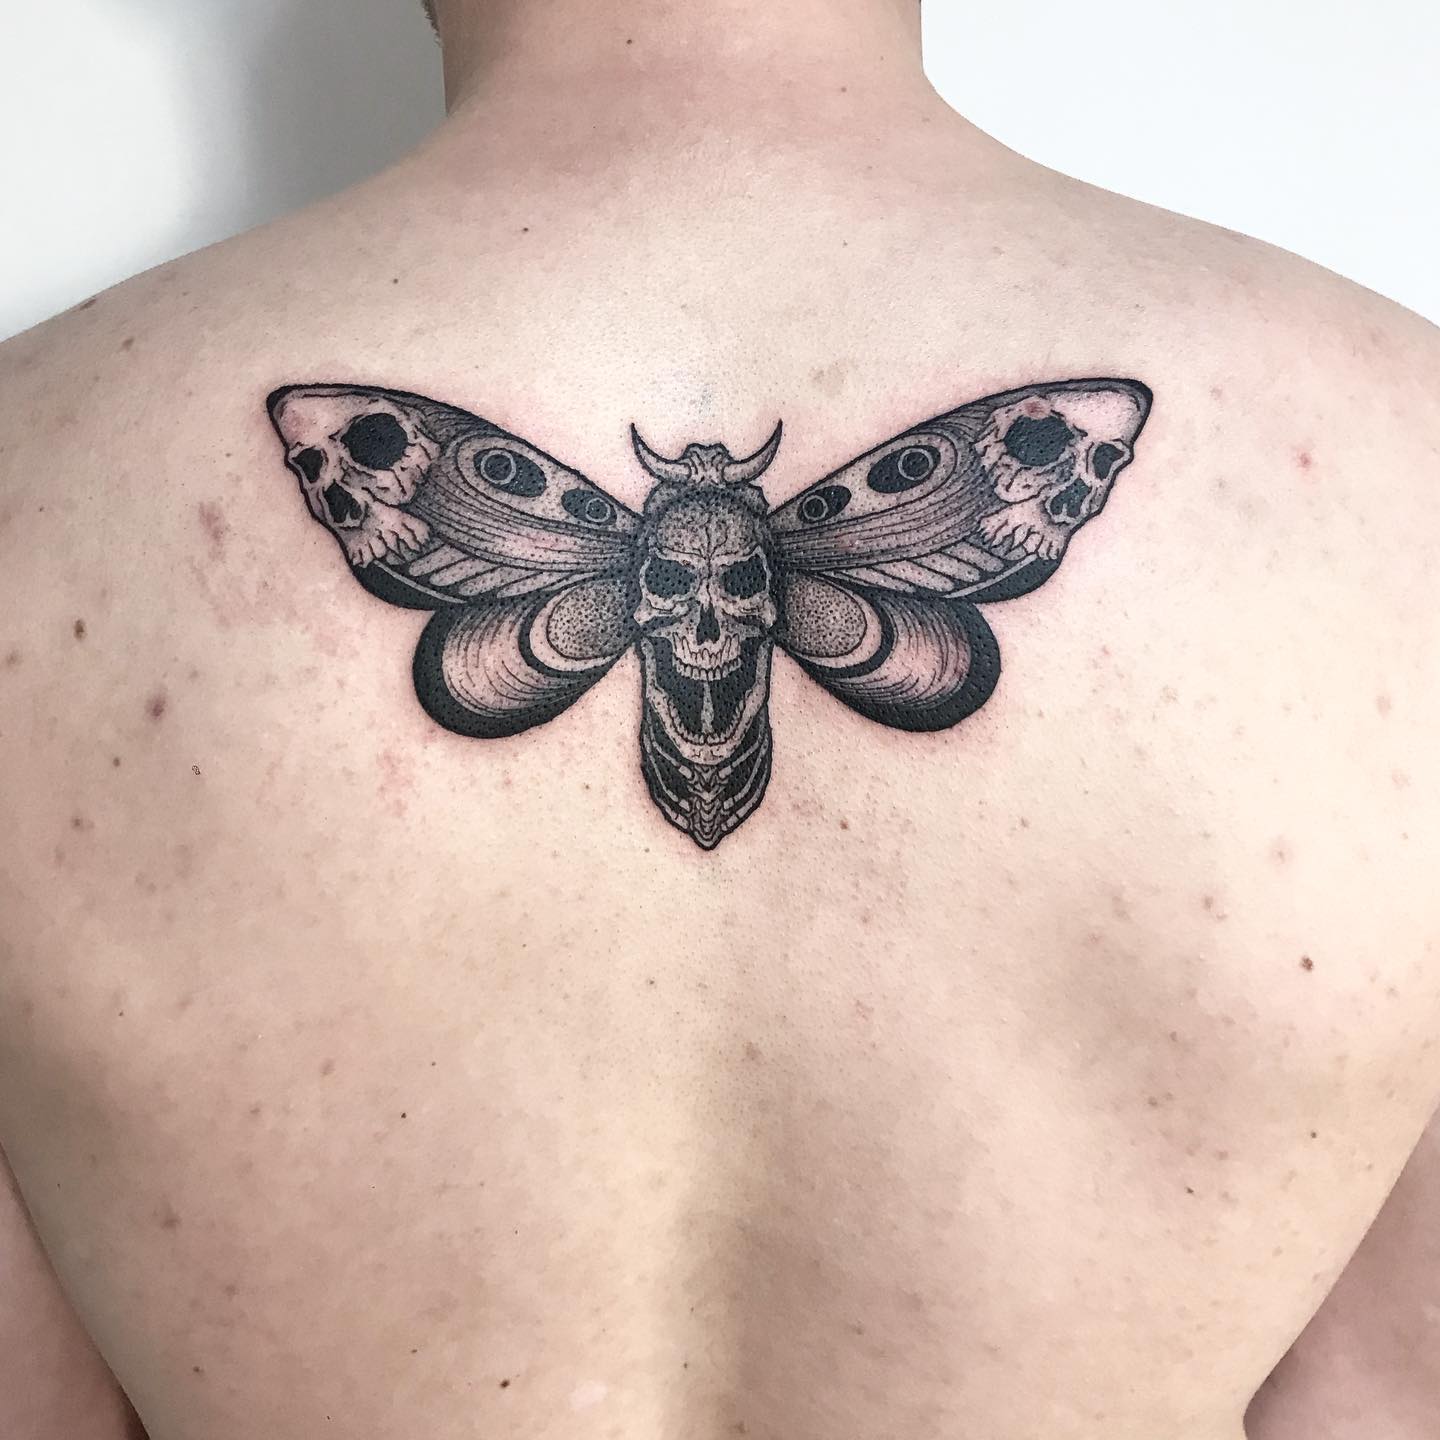 Men who fancy back tattoos will also like this tattoo. It is a somewhat big and scary print that will attract looks and will look dominant on most guys. Stick to a spread-wing concept if you fancy larger and more dominant art.